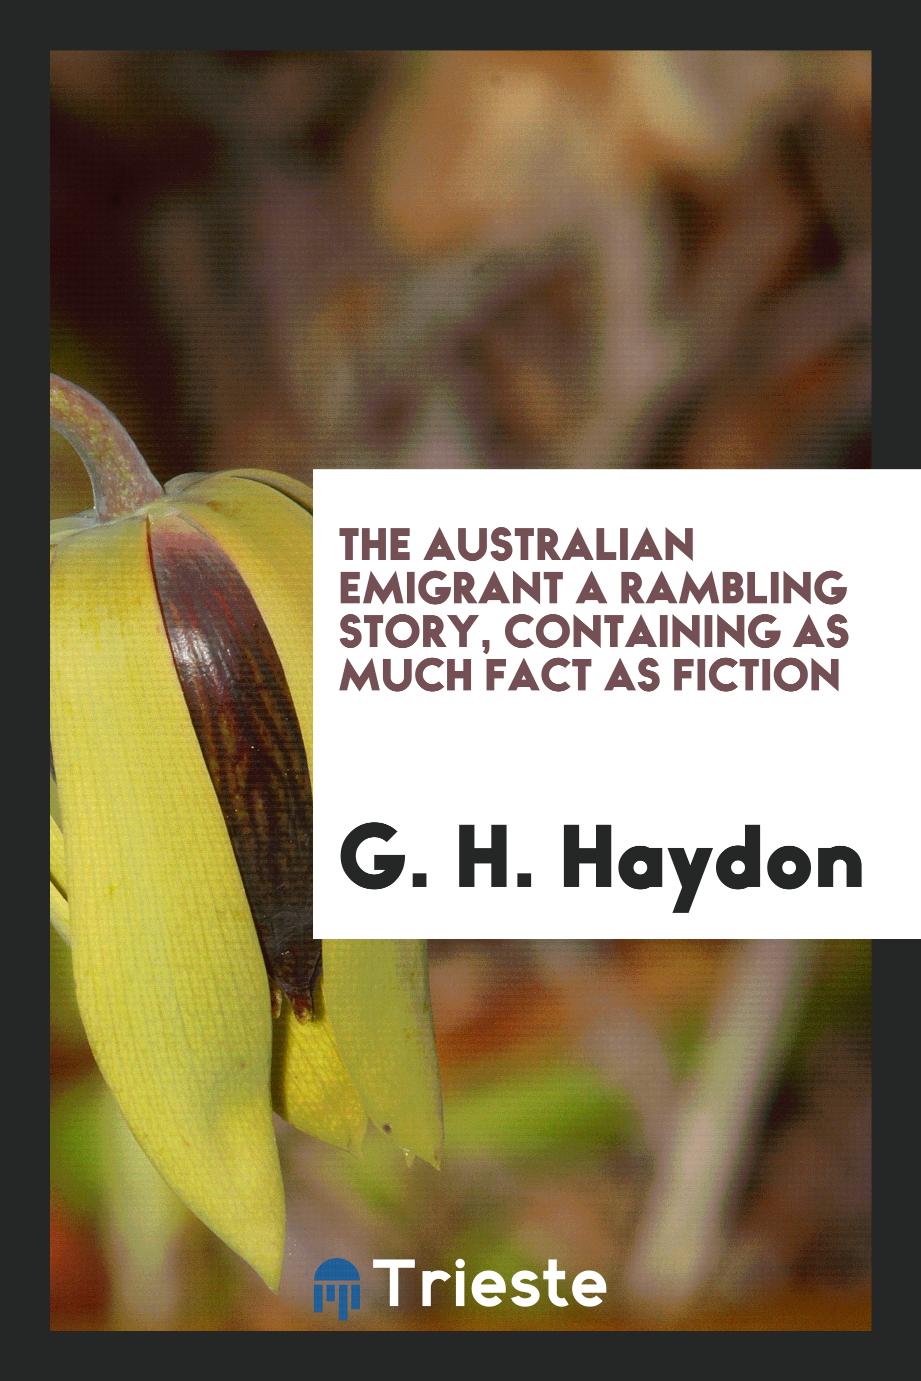 The Australian emigrant a rambling story, containing as much fact as fiction